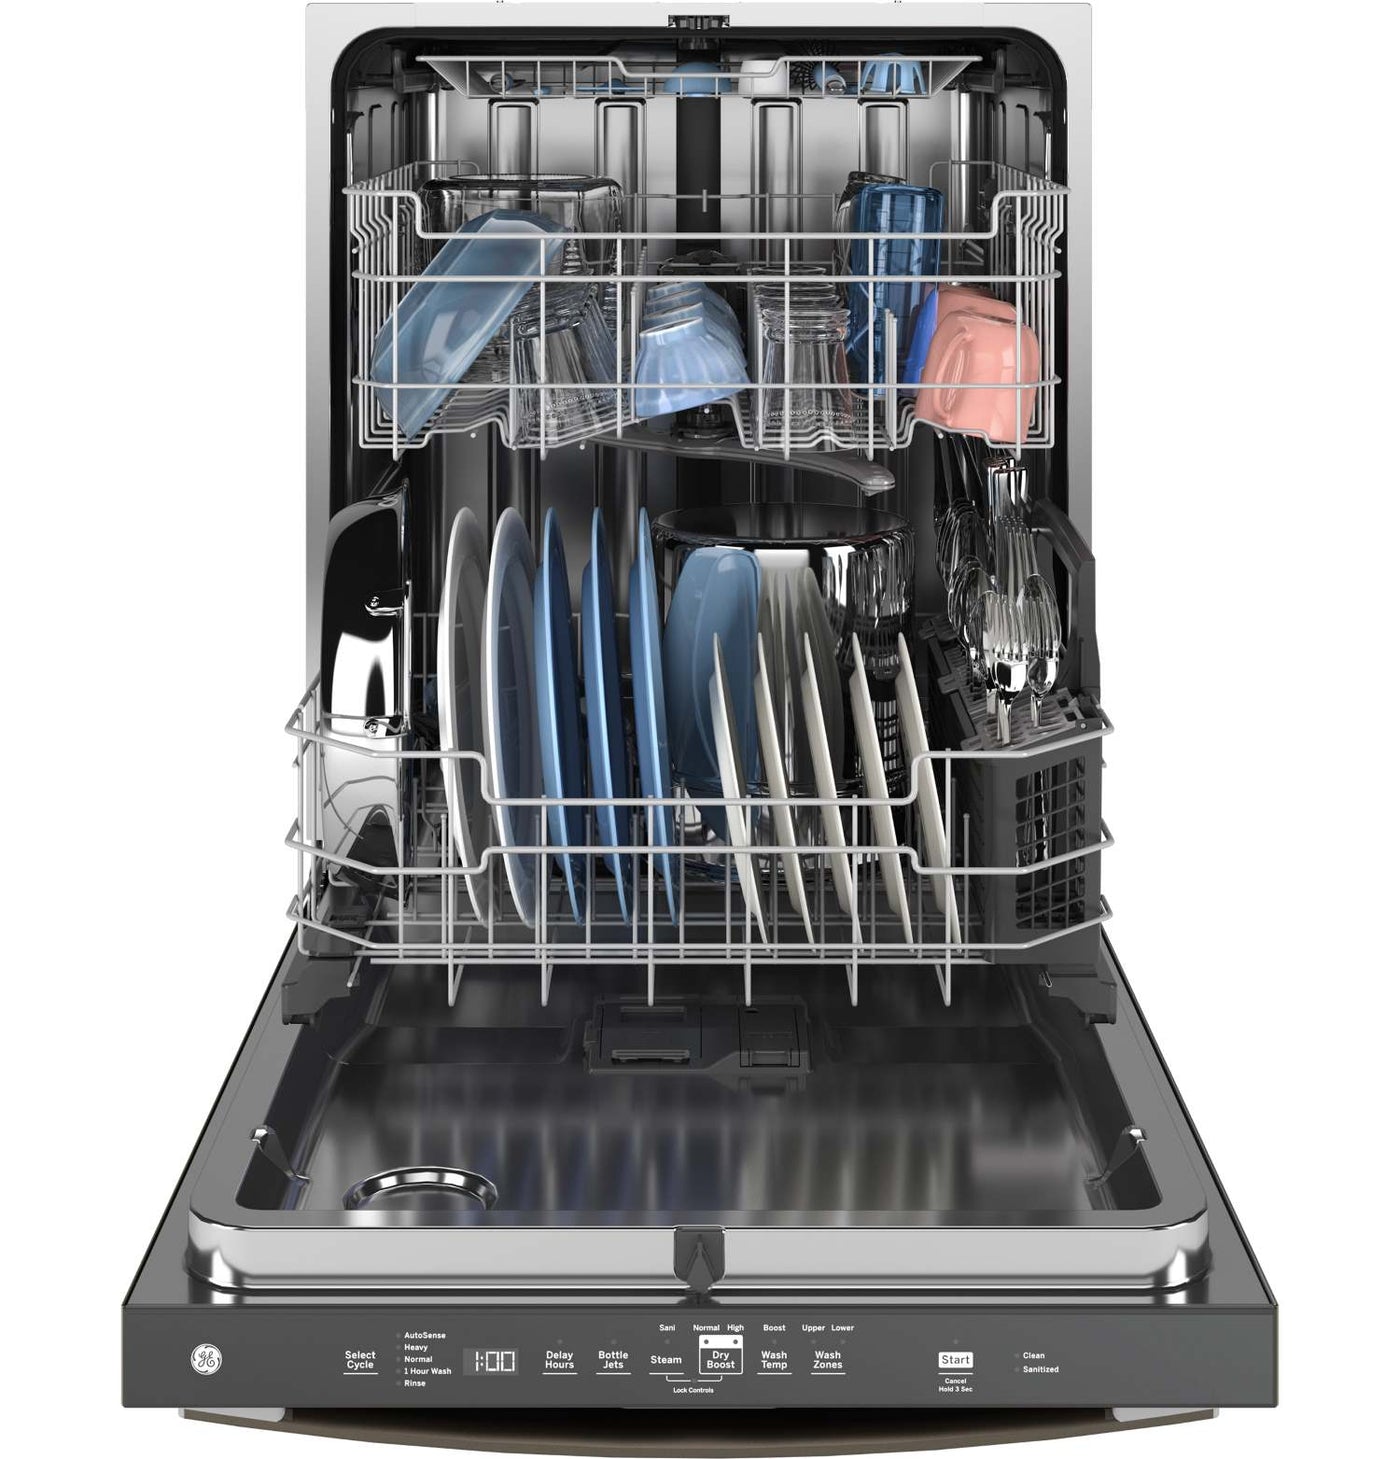 GE 24" Slate Top Control Dishwasher with Stainless Steel Interior and Third Rack - GDT650SMVES